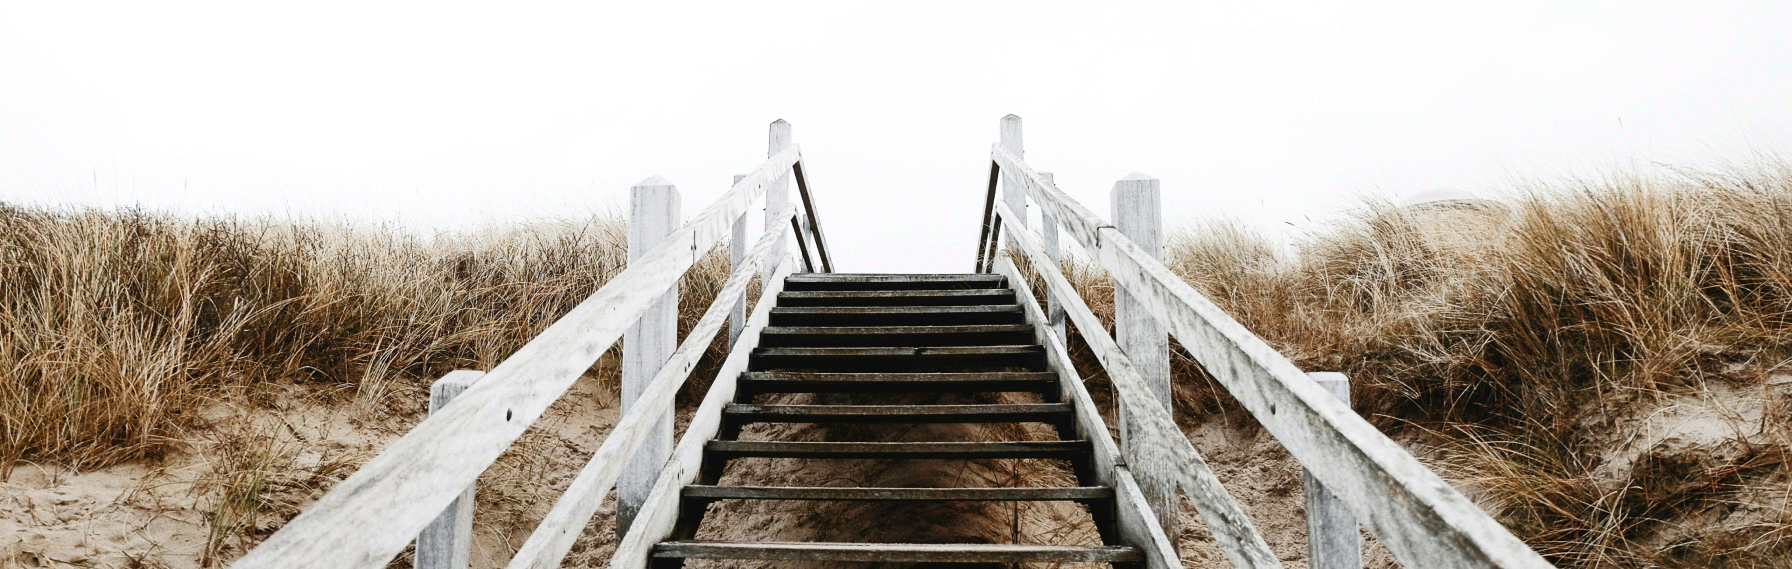 A staircase on a sandy dune